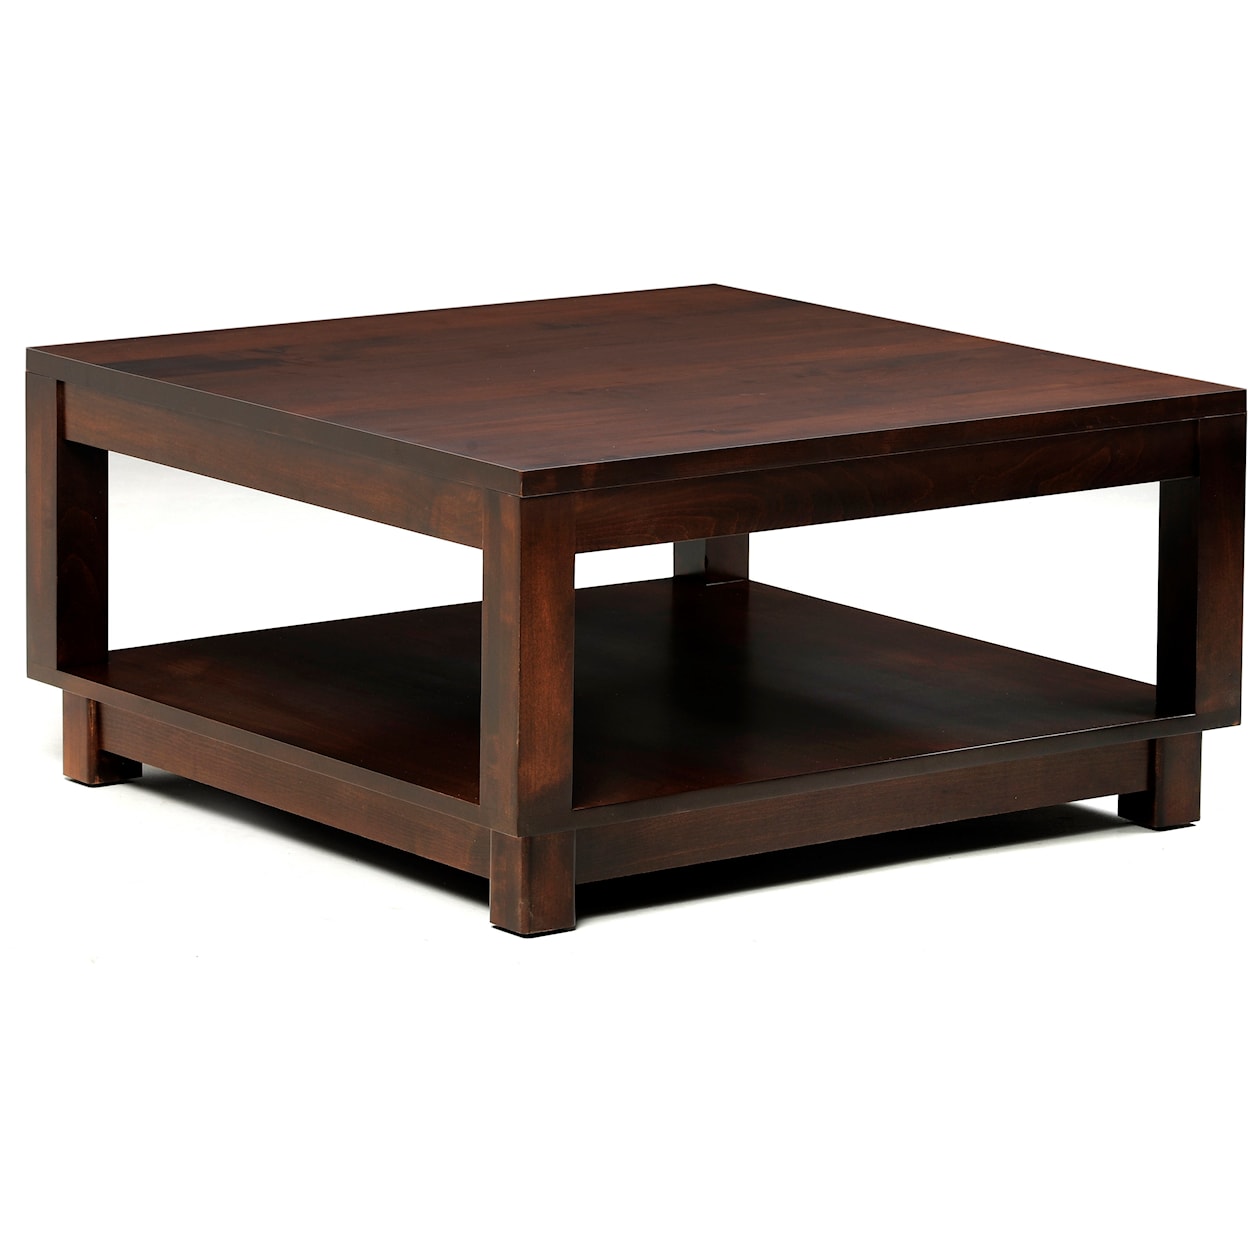 Y & T Woodcraft Urban Square Coffee Table